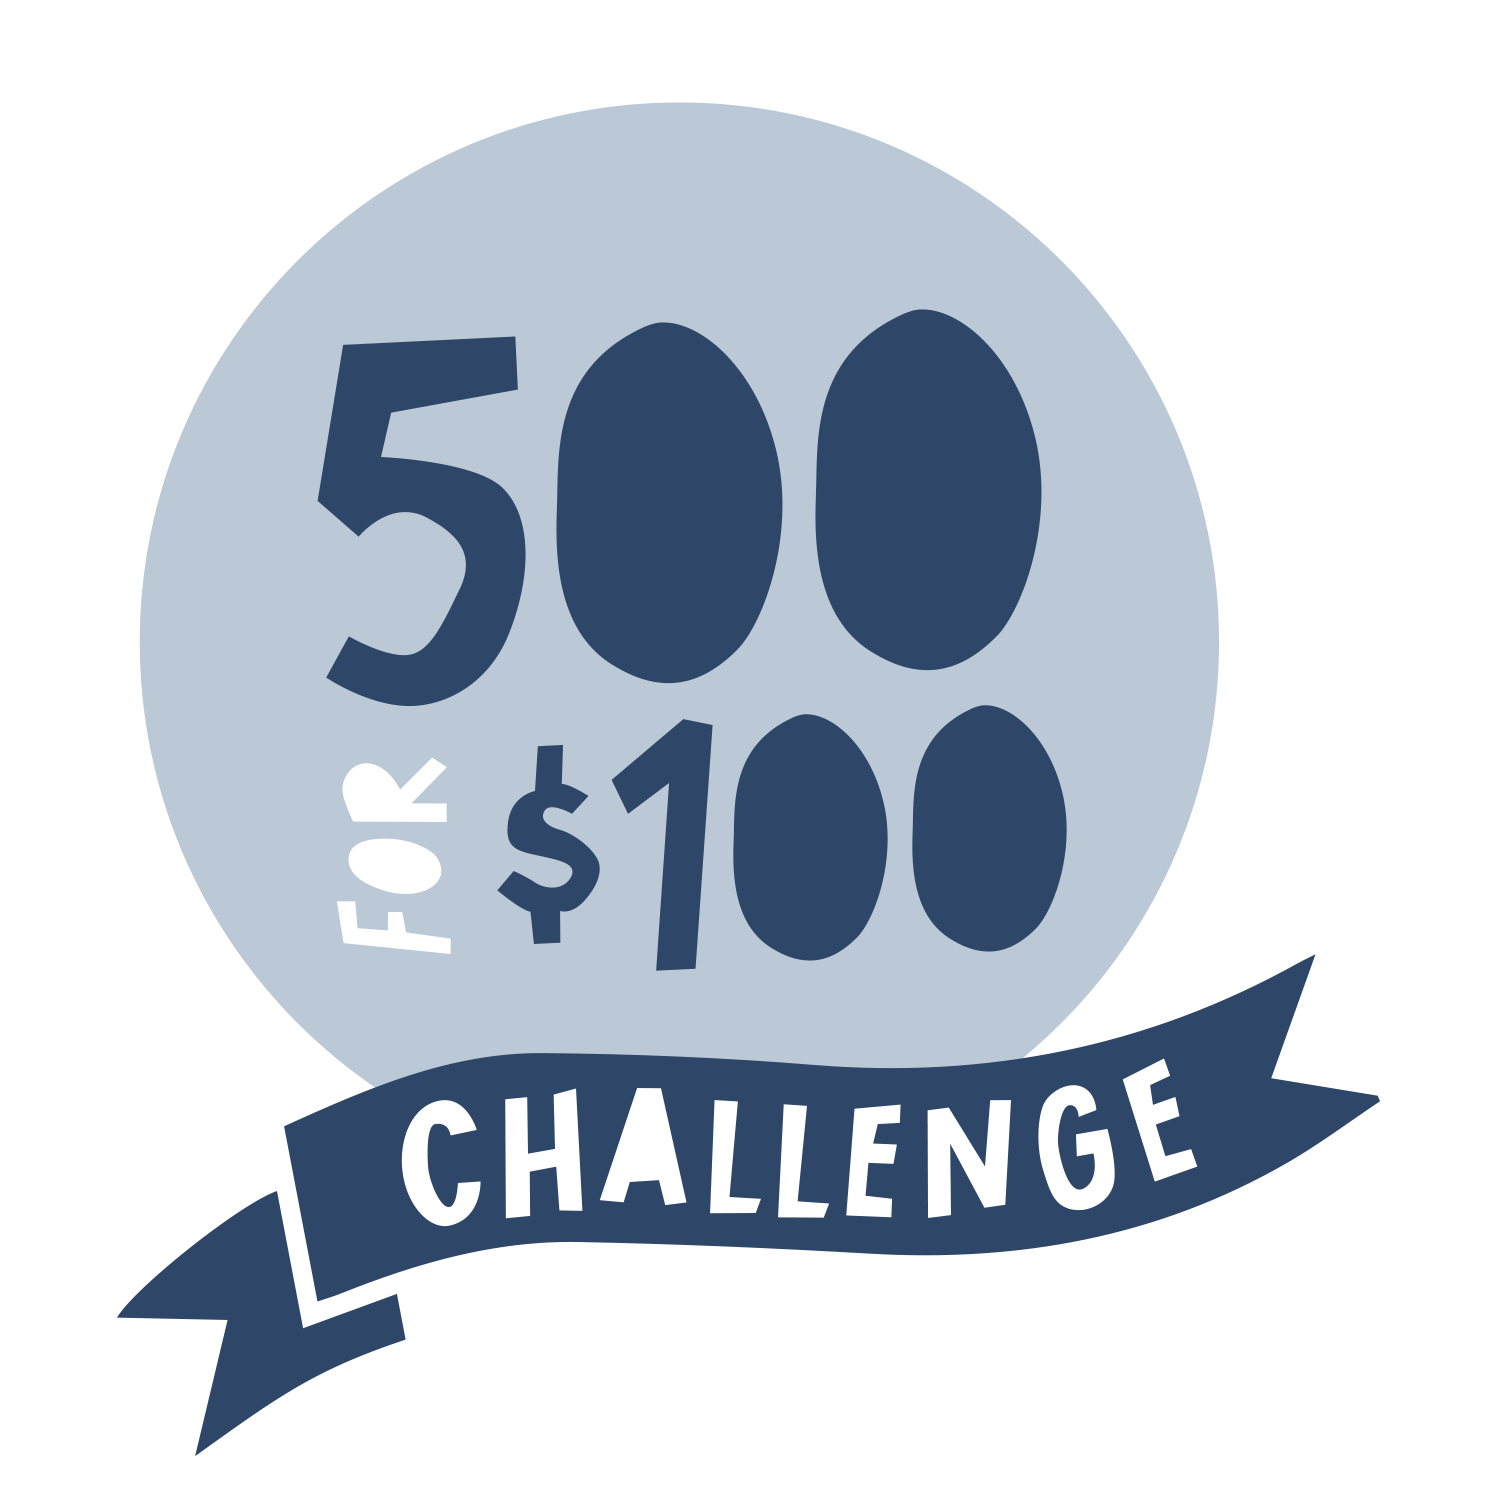 Academy of the Arts launches 500 for 100 Challenge